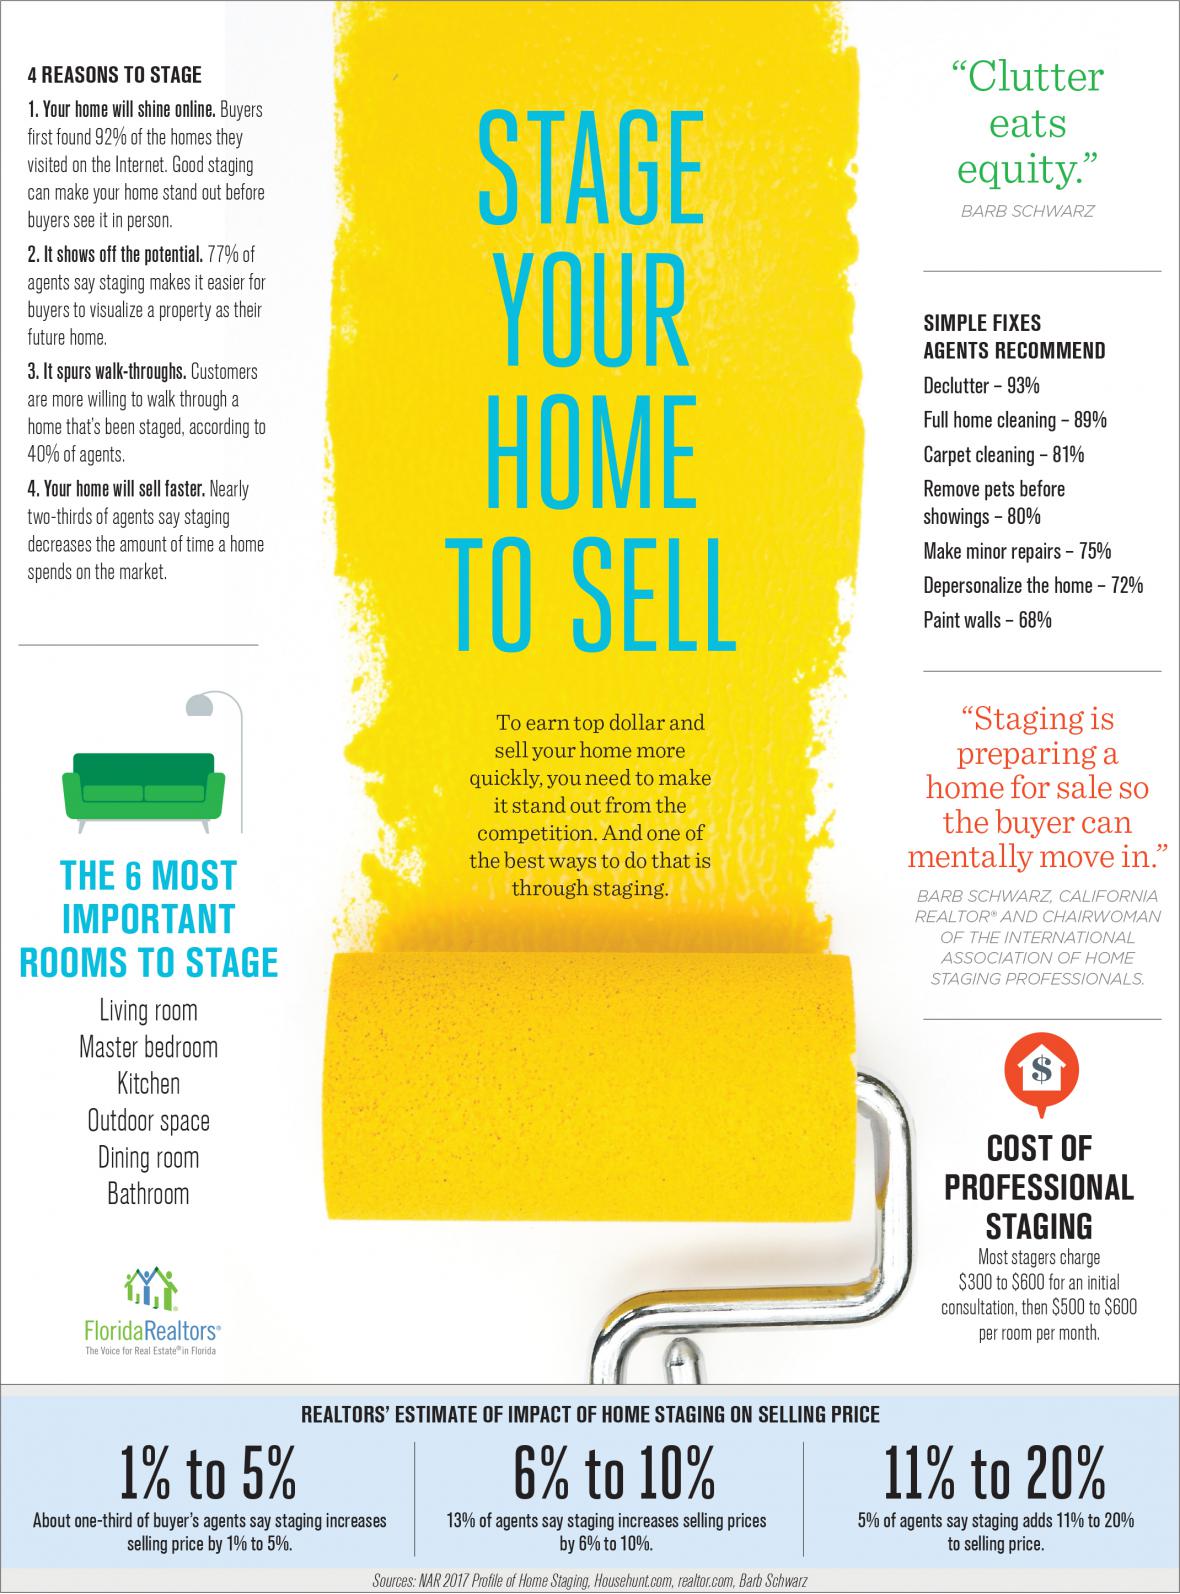 STAGE YOUR HOME TO SELL